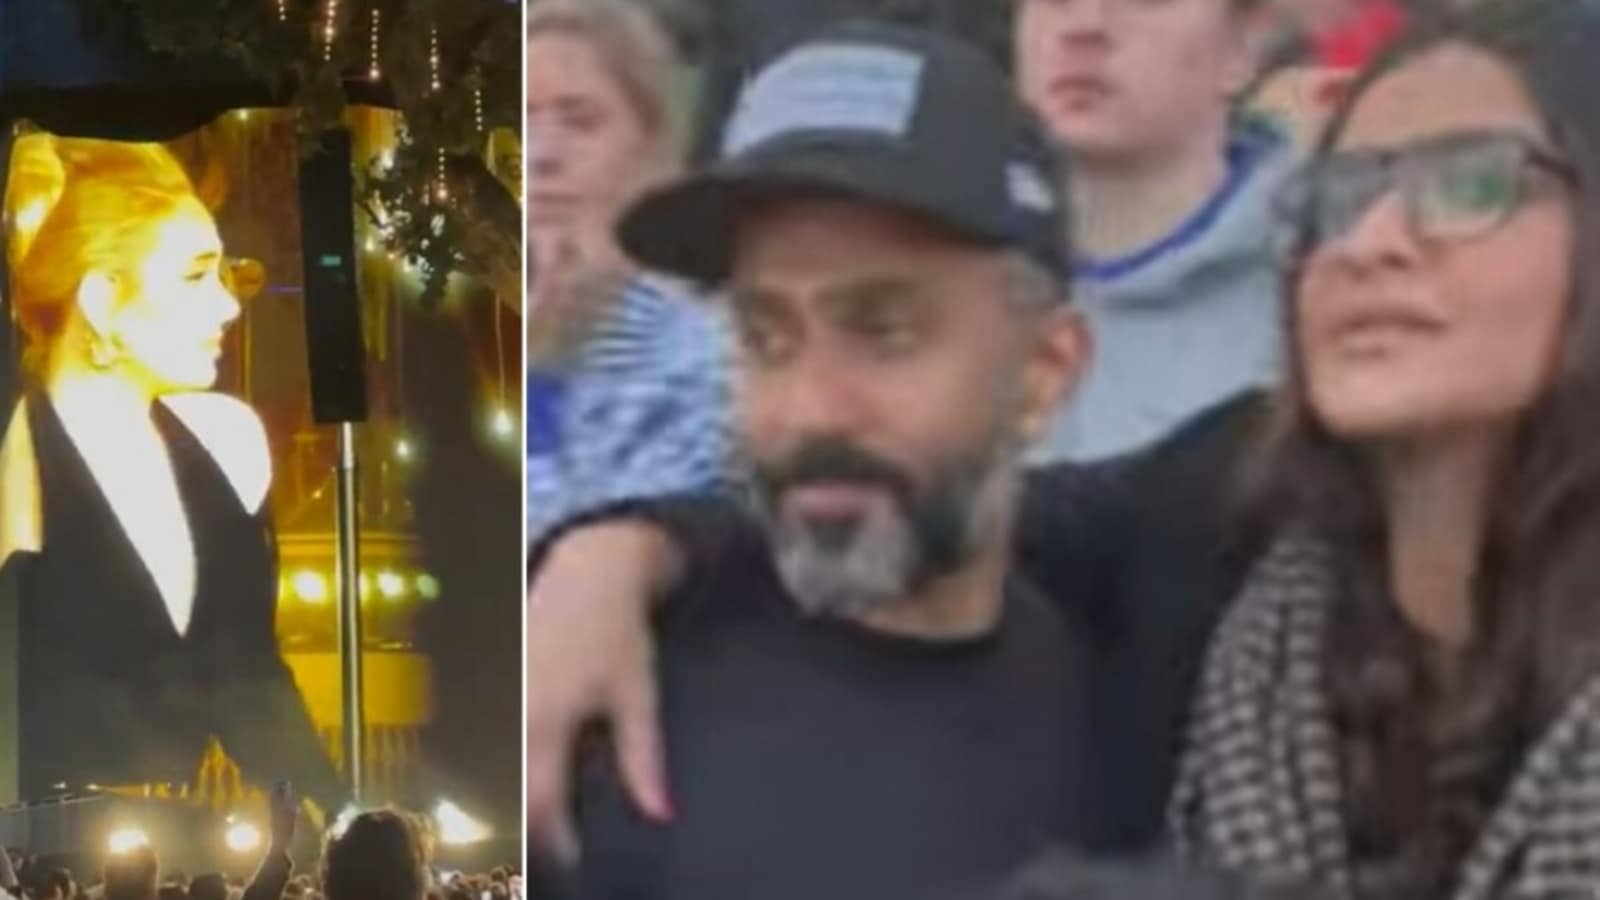 Sonam Kapoor and Anand Ahuja attend Adele’s London show, sing Someone Like You with other concert-goers. Watch